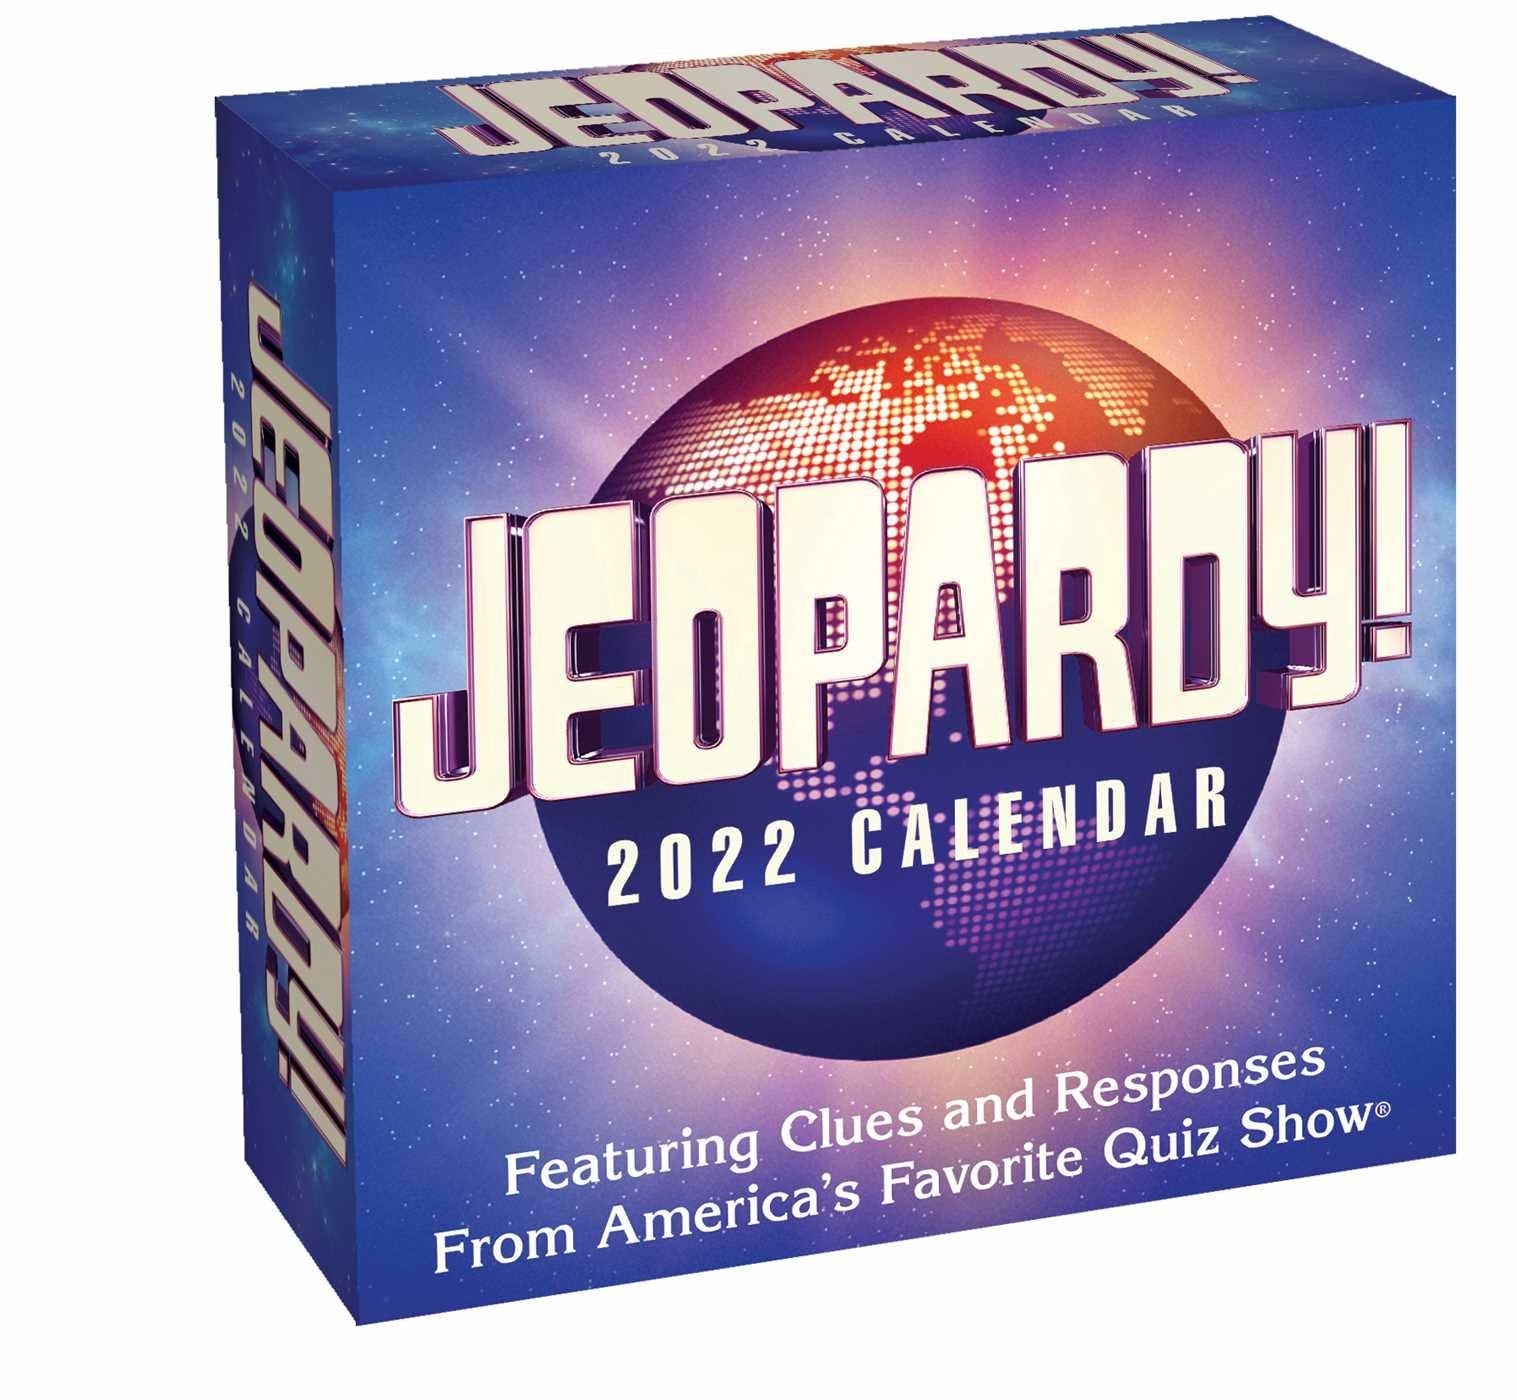 The Jeopardy! 2022 Day-to-Day Calendar